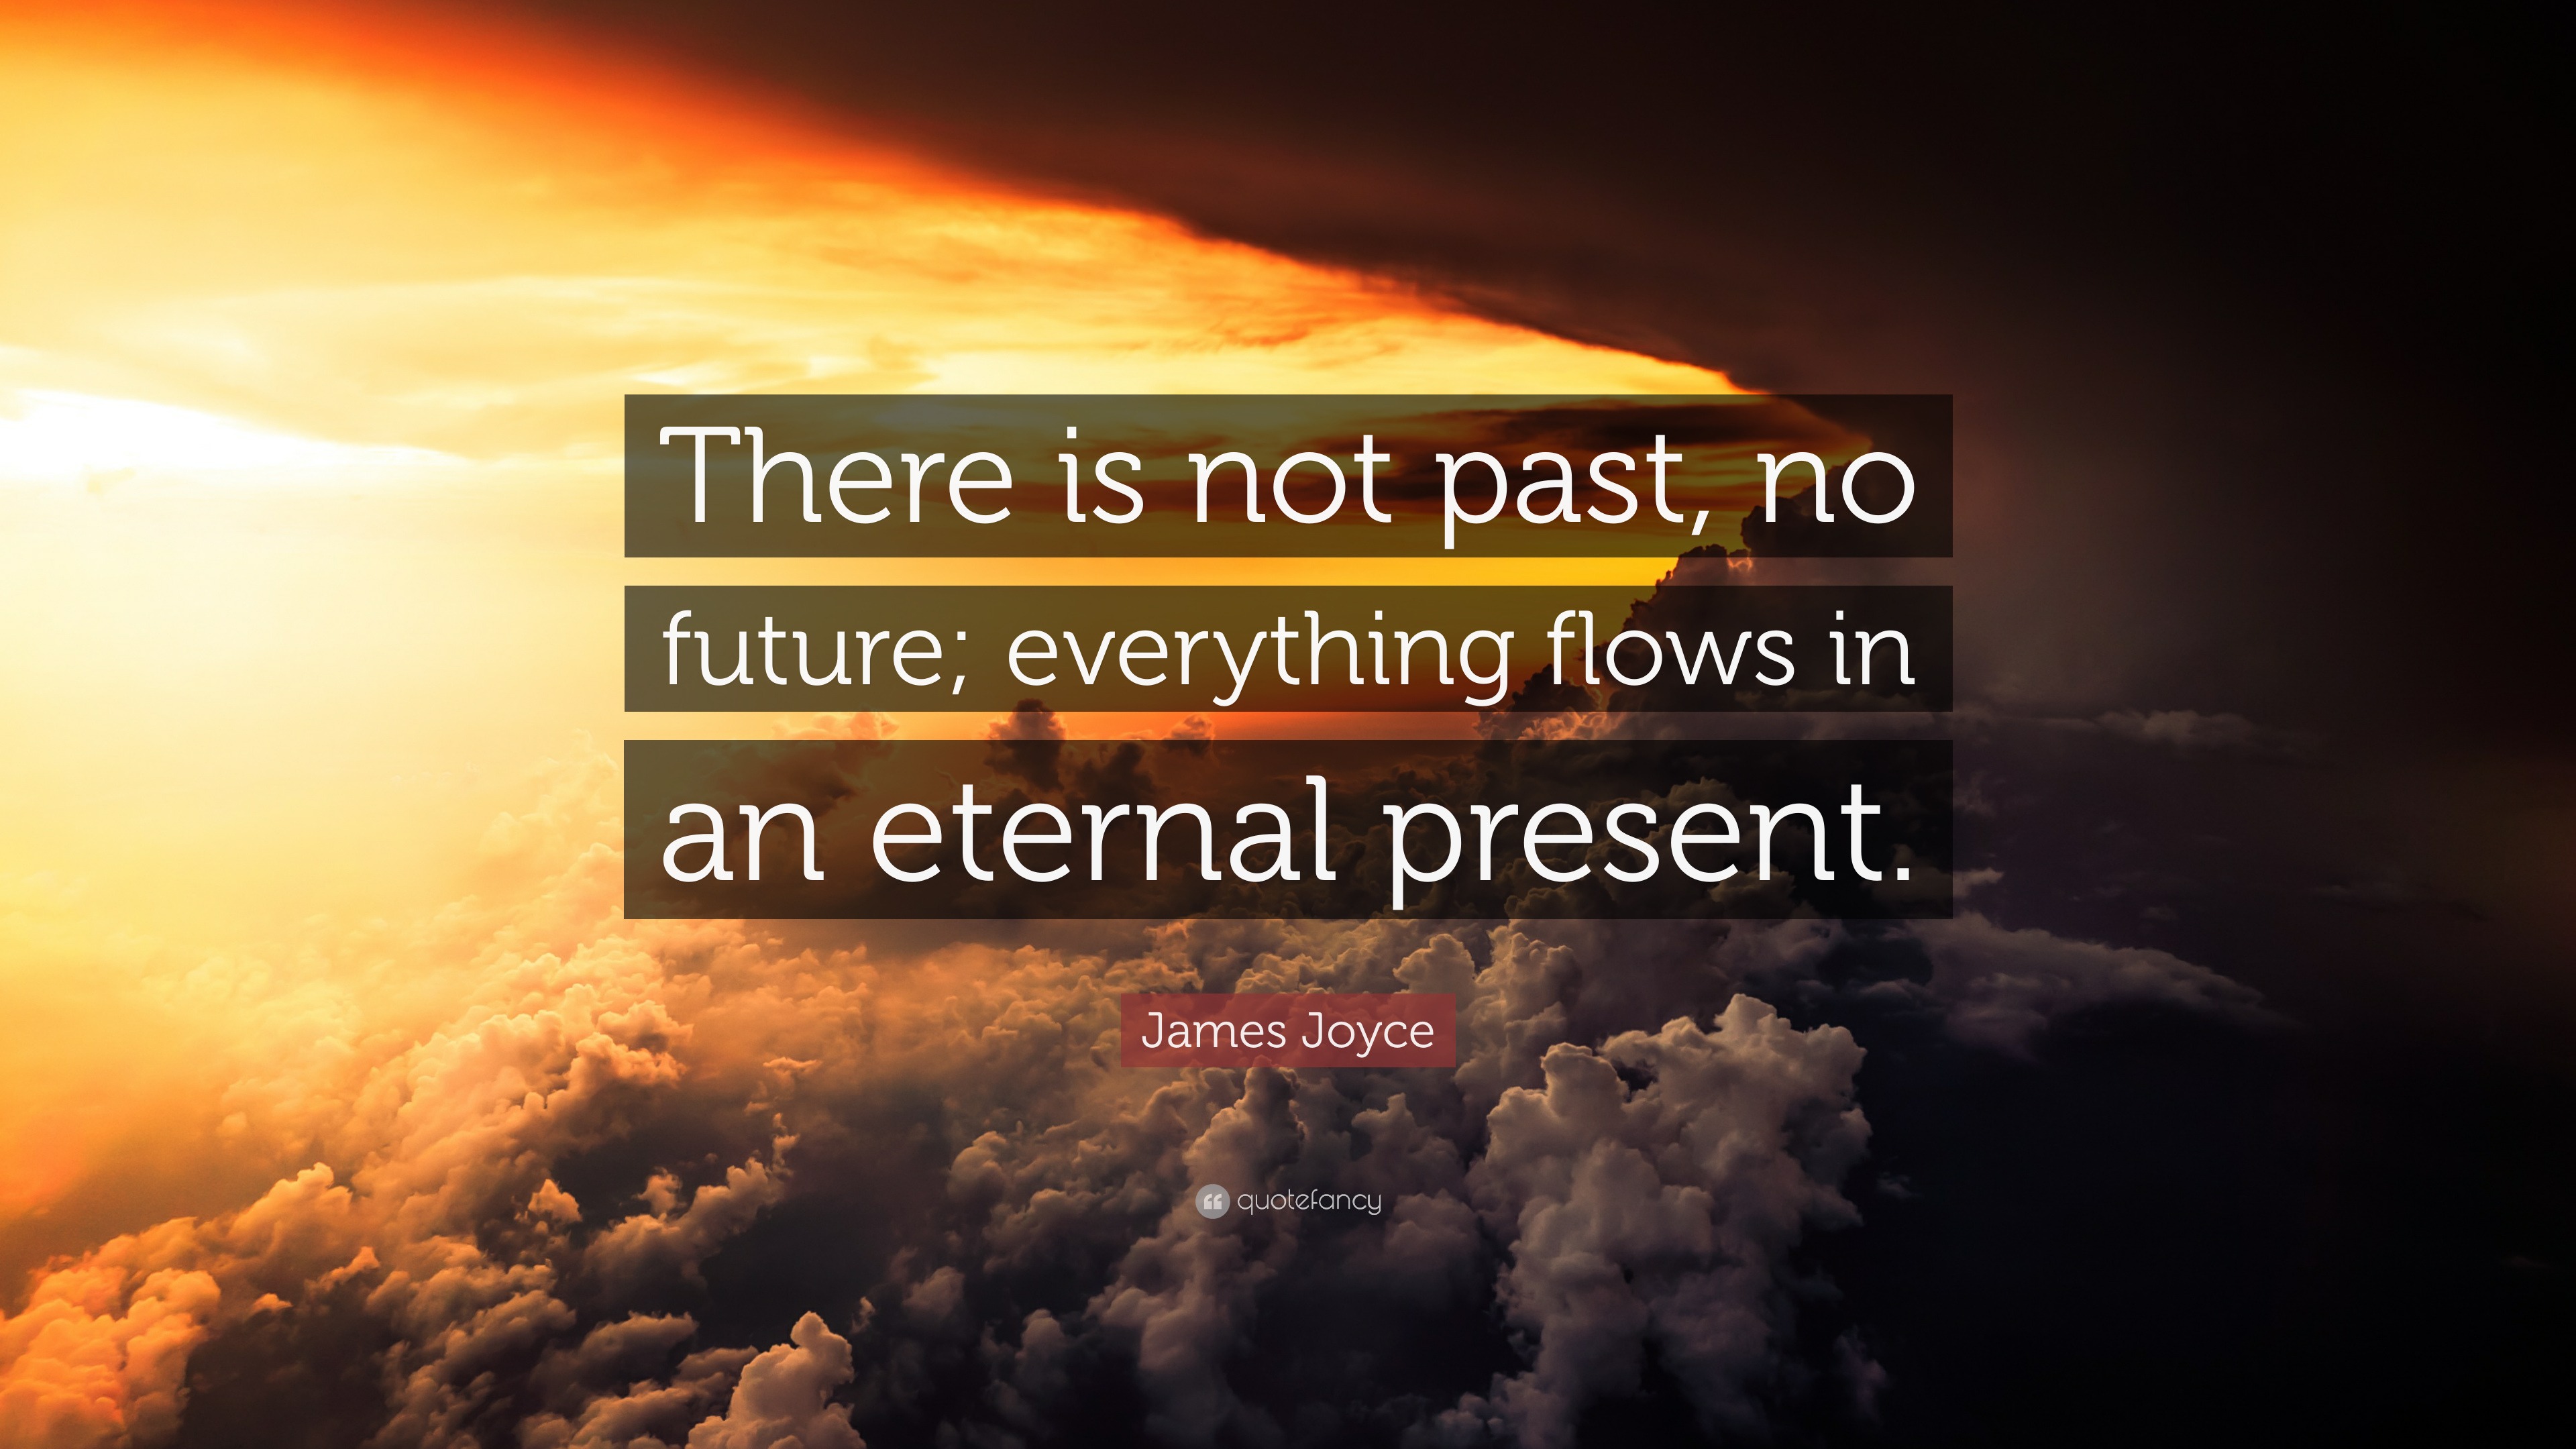 James Joyce Quote: “There is not past, no future; everything flows in ...